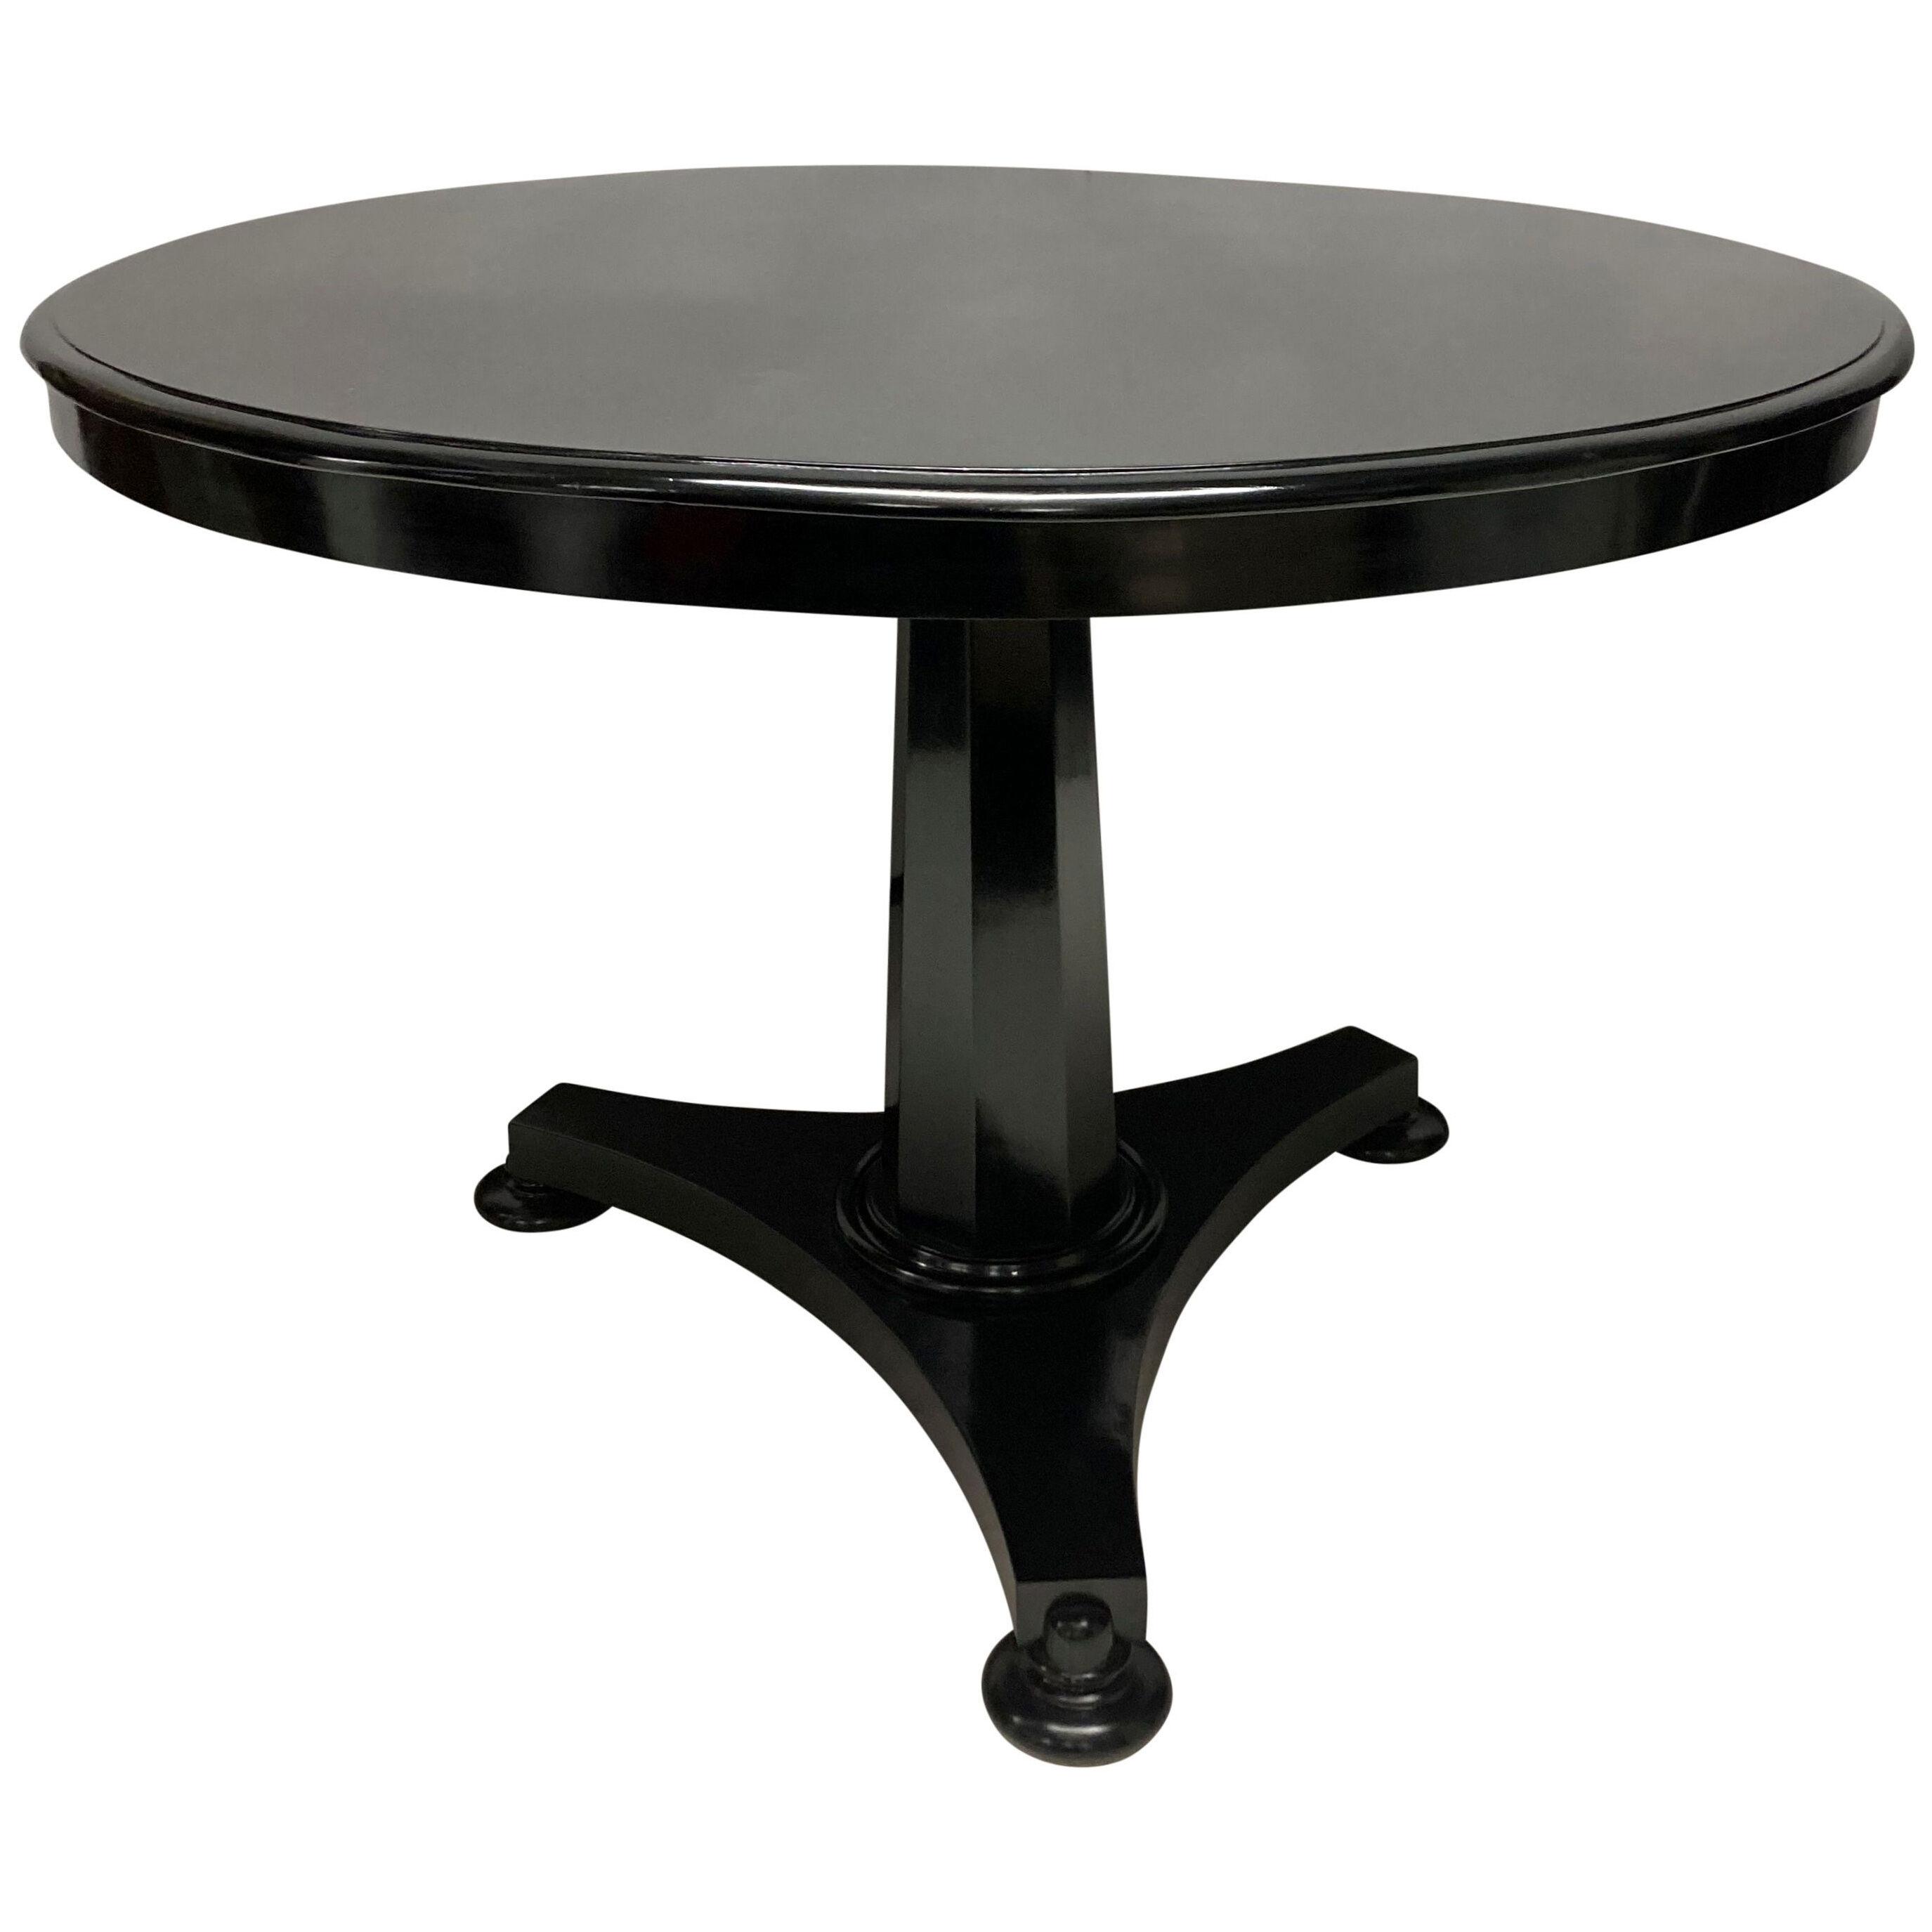 A BLACK LACQUERED GUERIDON TABLE